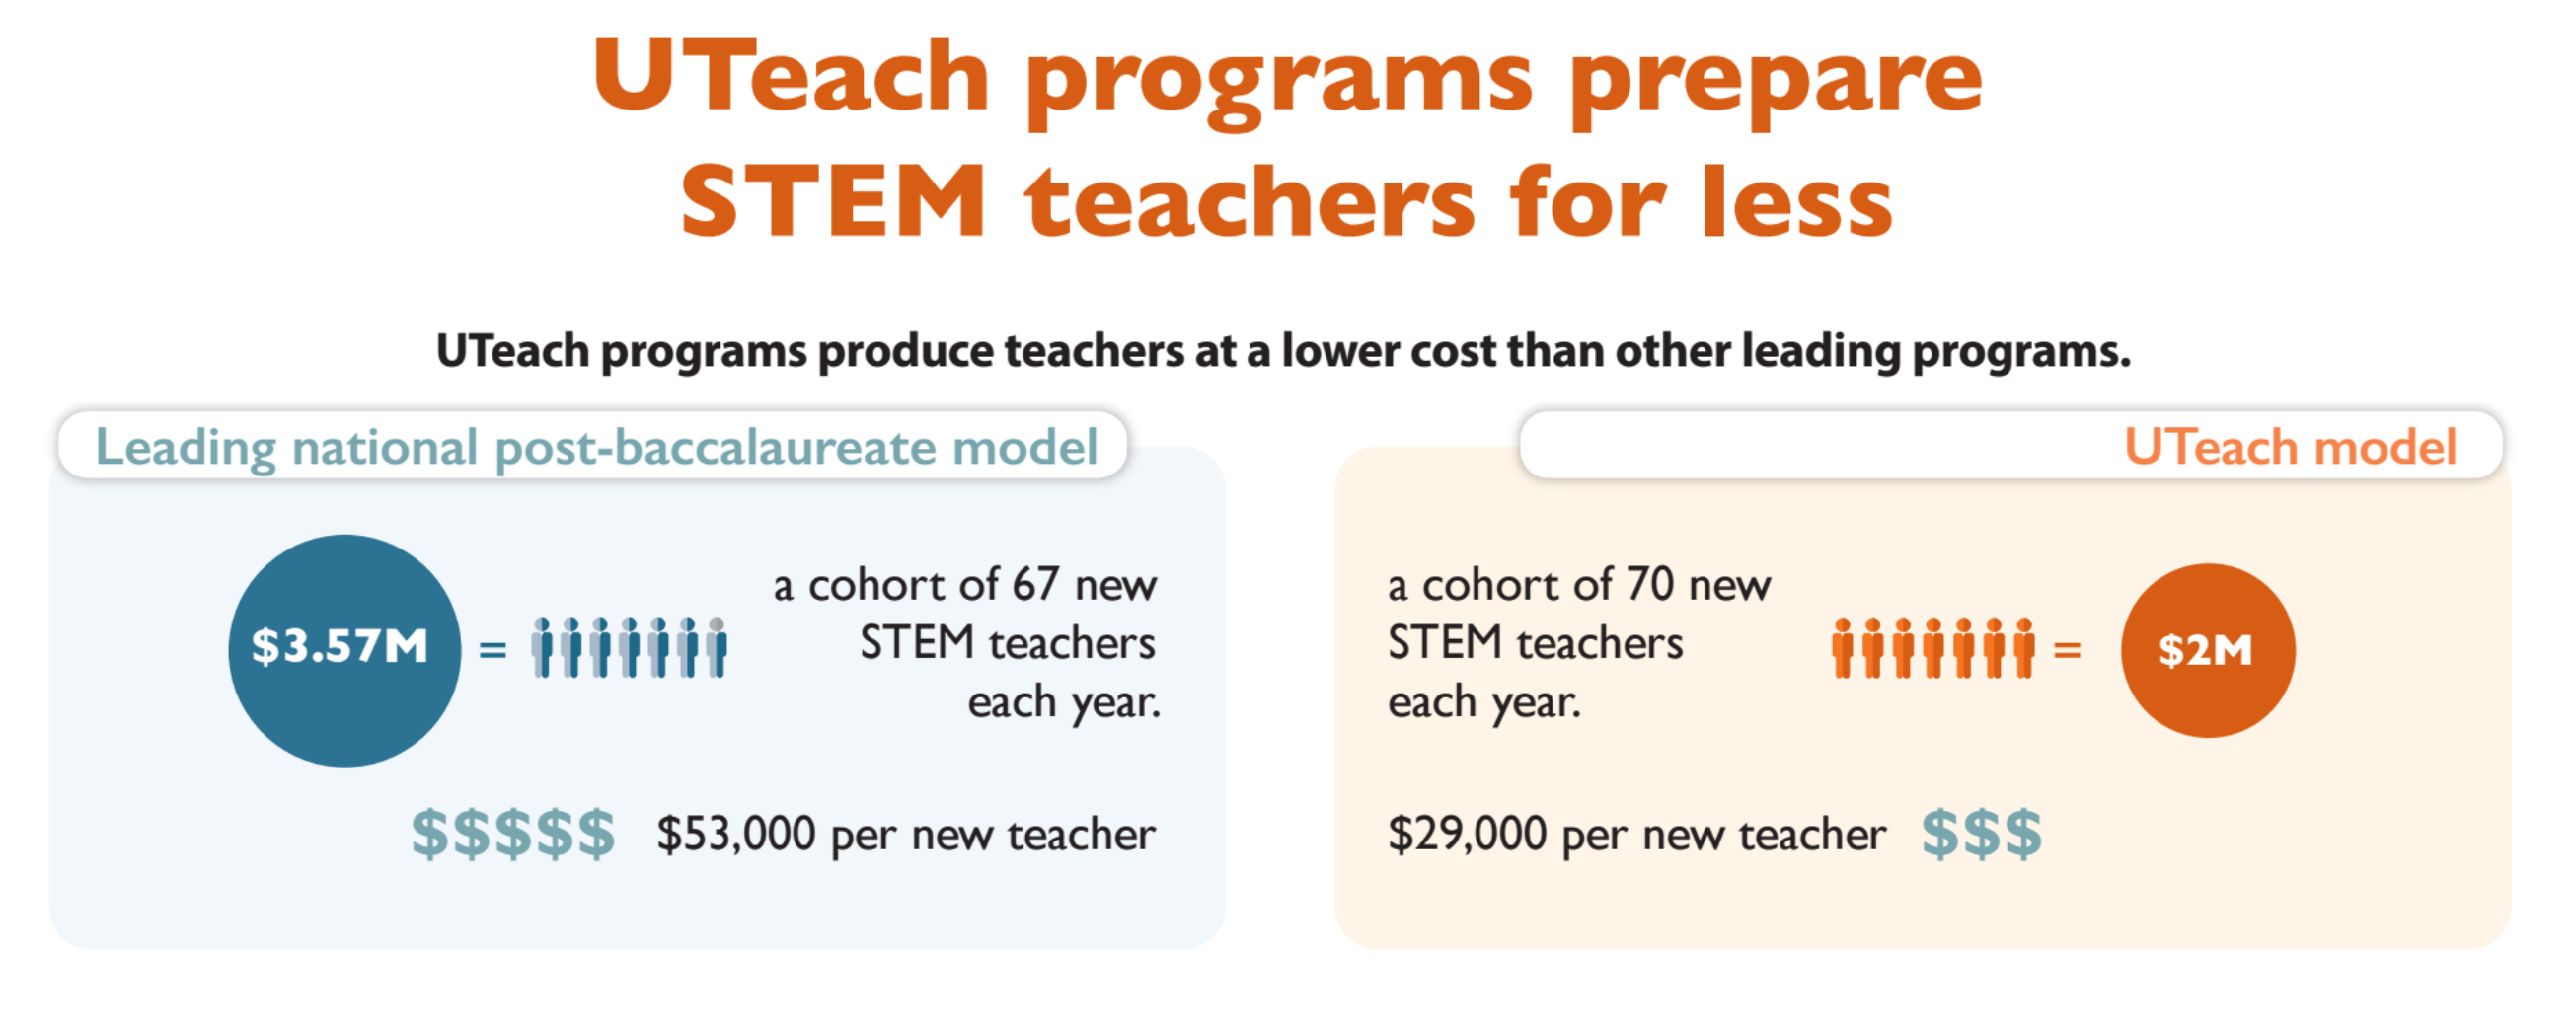 UTeach students cost less to train when compared to traditional teaching programs.